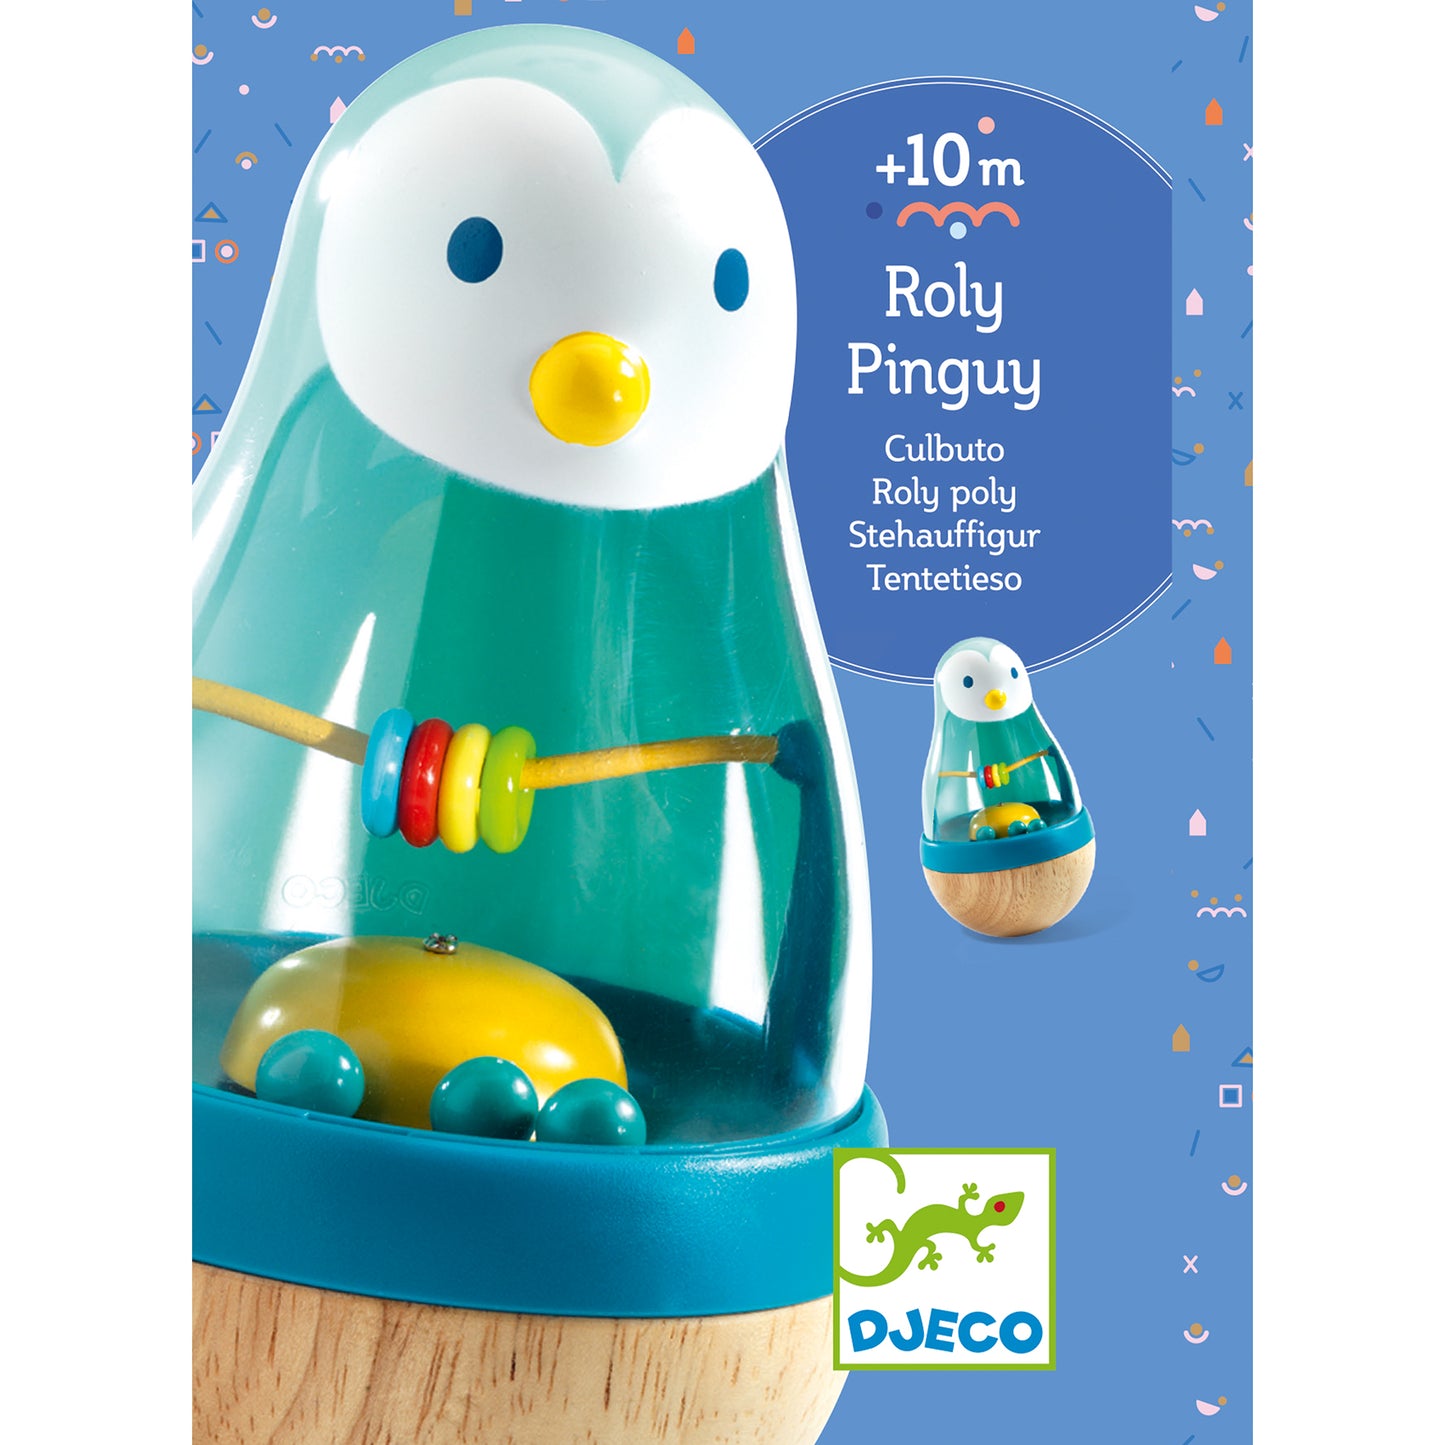 Roly pingui